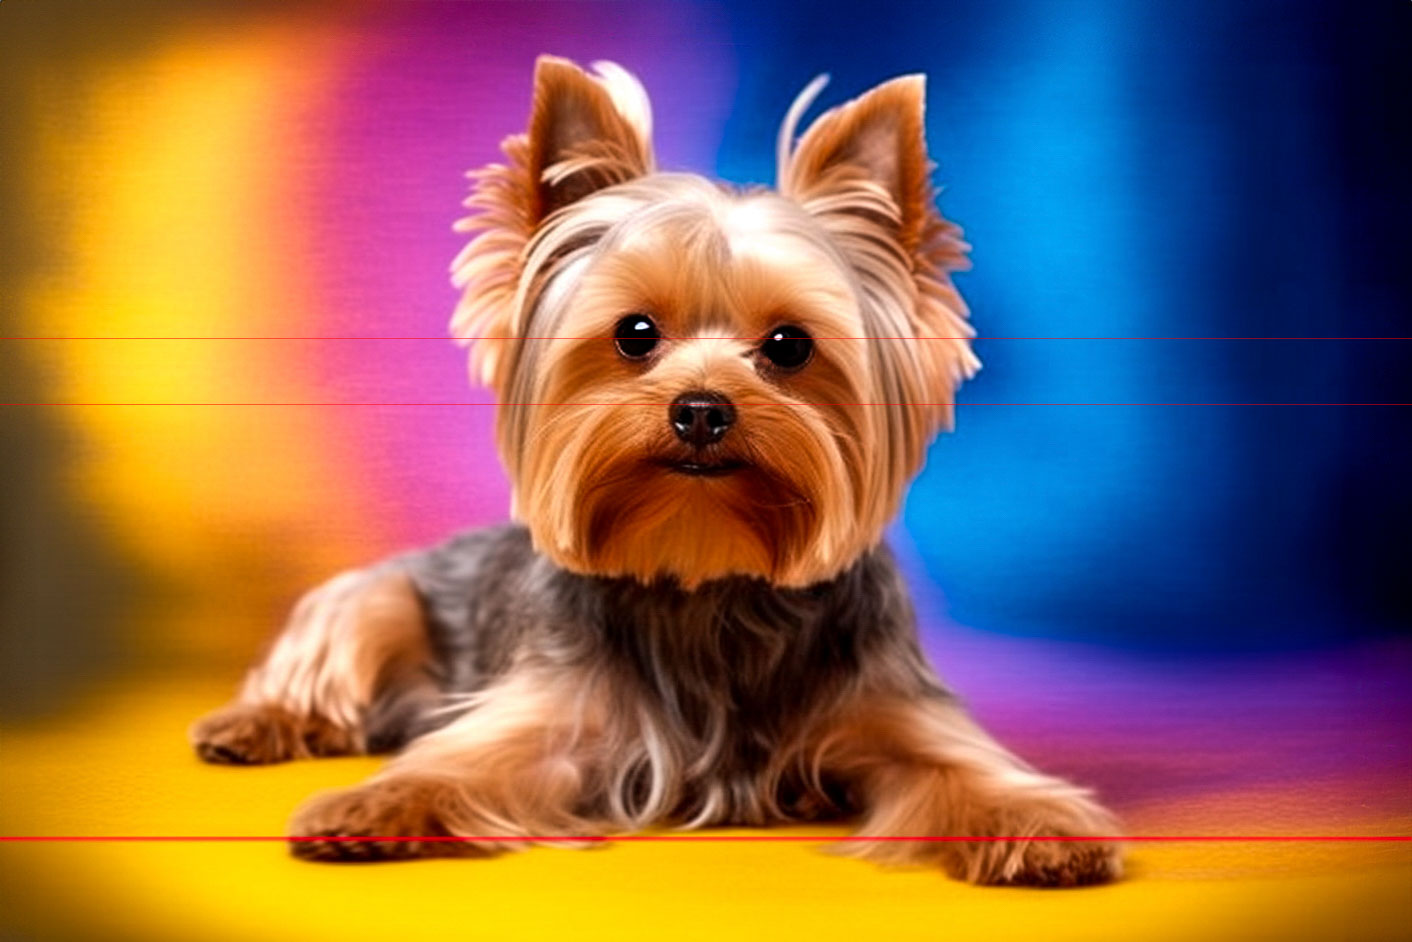 A picture of a Yorkshire Terrier with silky fur lies down on a vibrant yellow surface. The Yorkie has an alert and attentive expression, with its ears perked up. The background features a colorful, blurred gradient of blue and pink hues, adding a lively and playful atmosphere to the image.